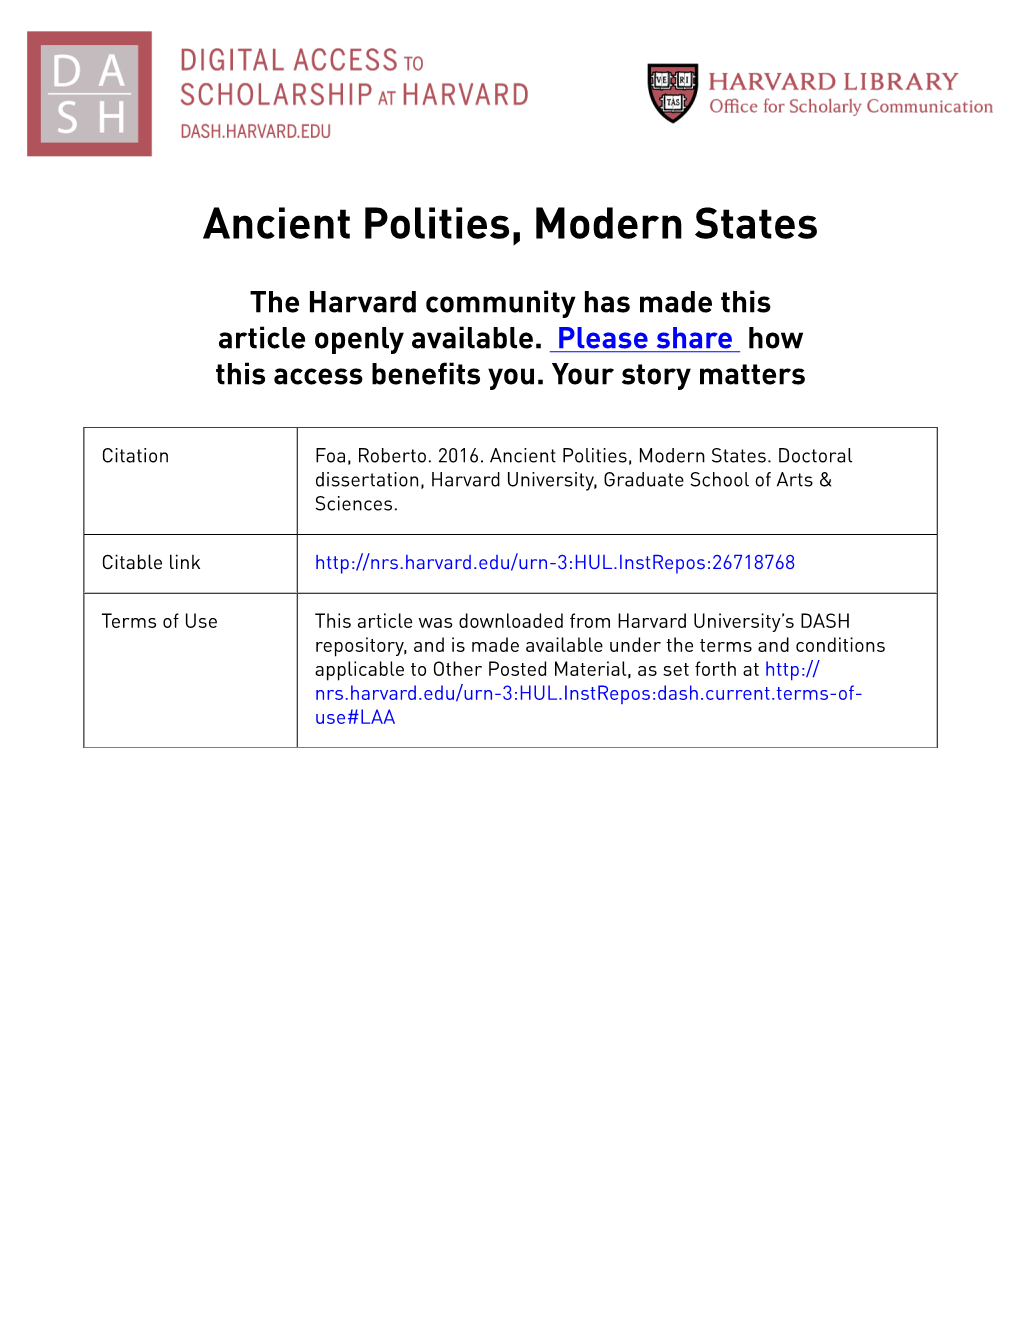 Ancient Polities, Modern States